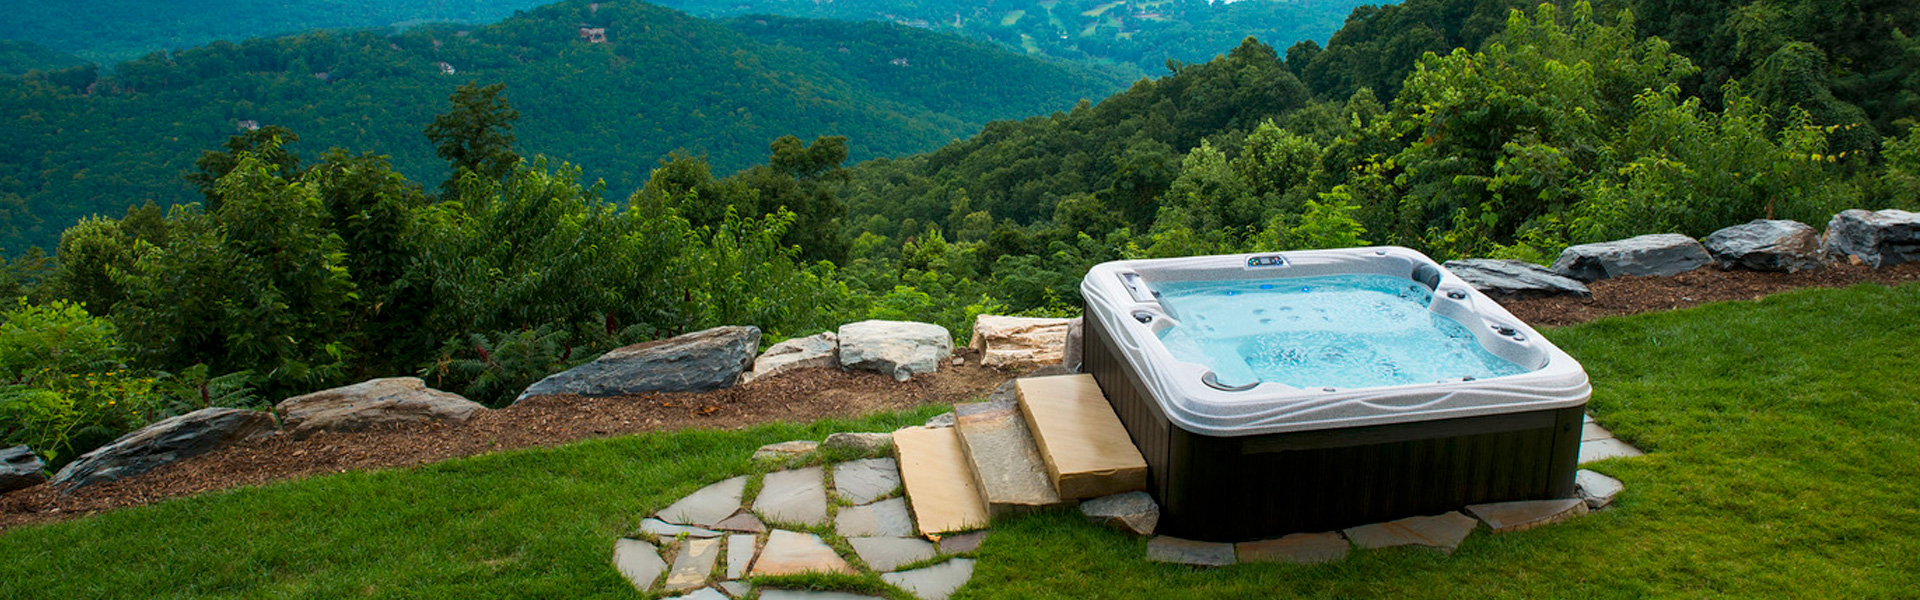 Buying a Hot Tub Cover